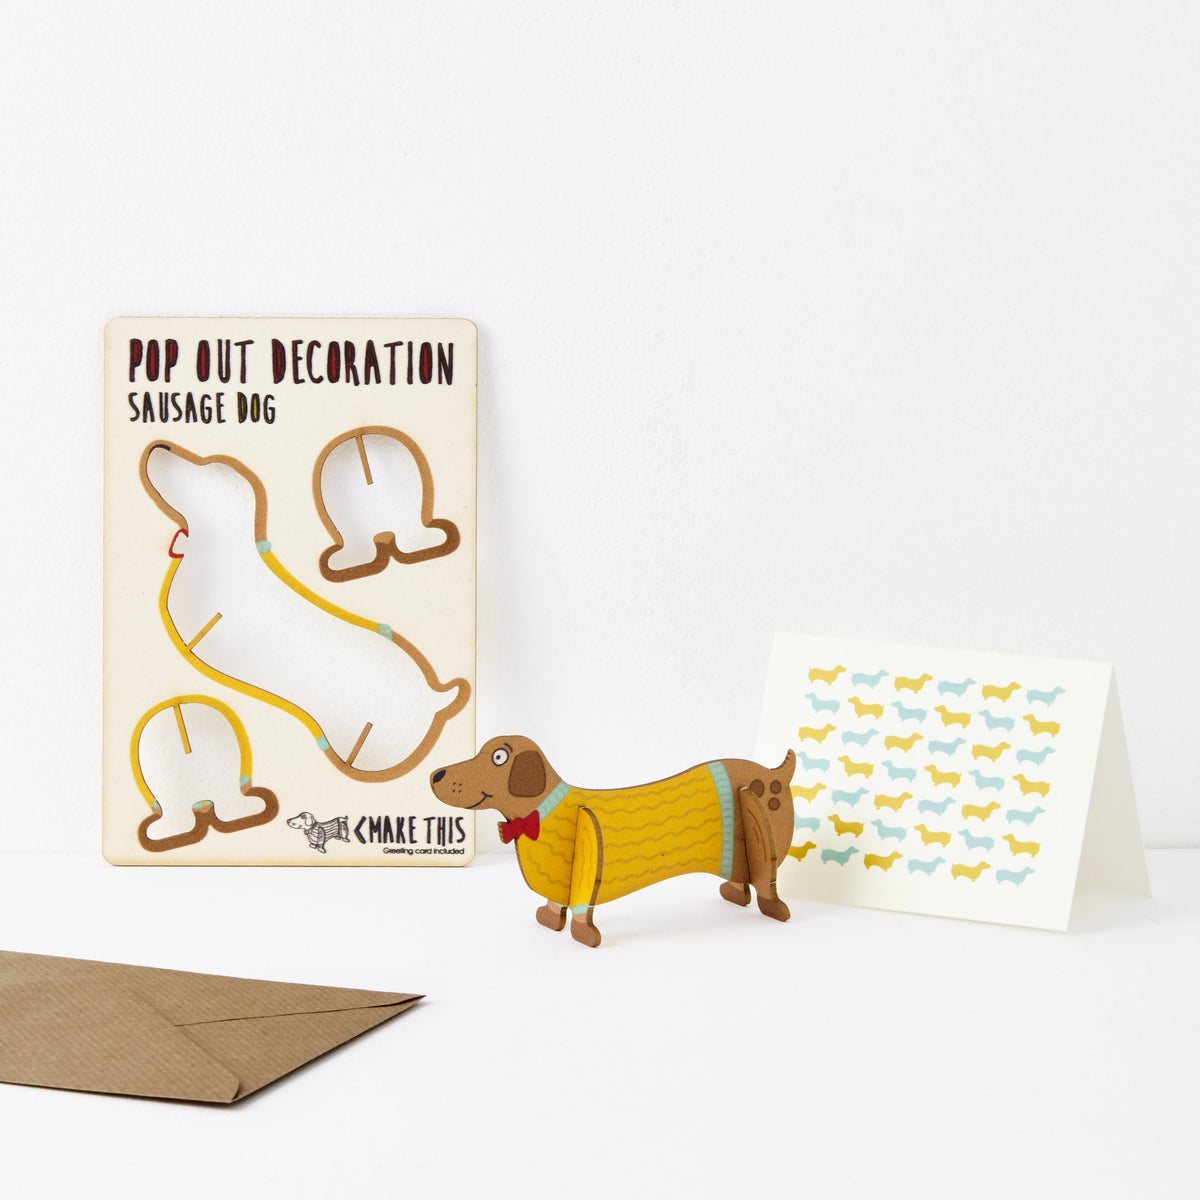 Pop out sausage dog greeting card